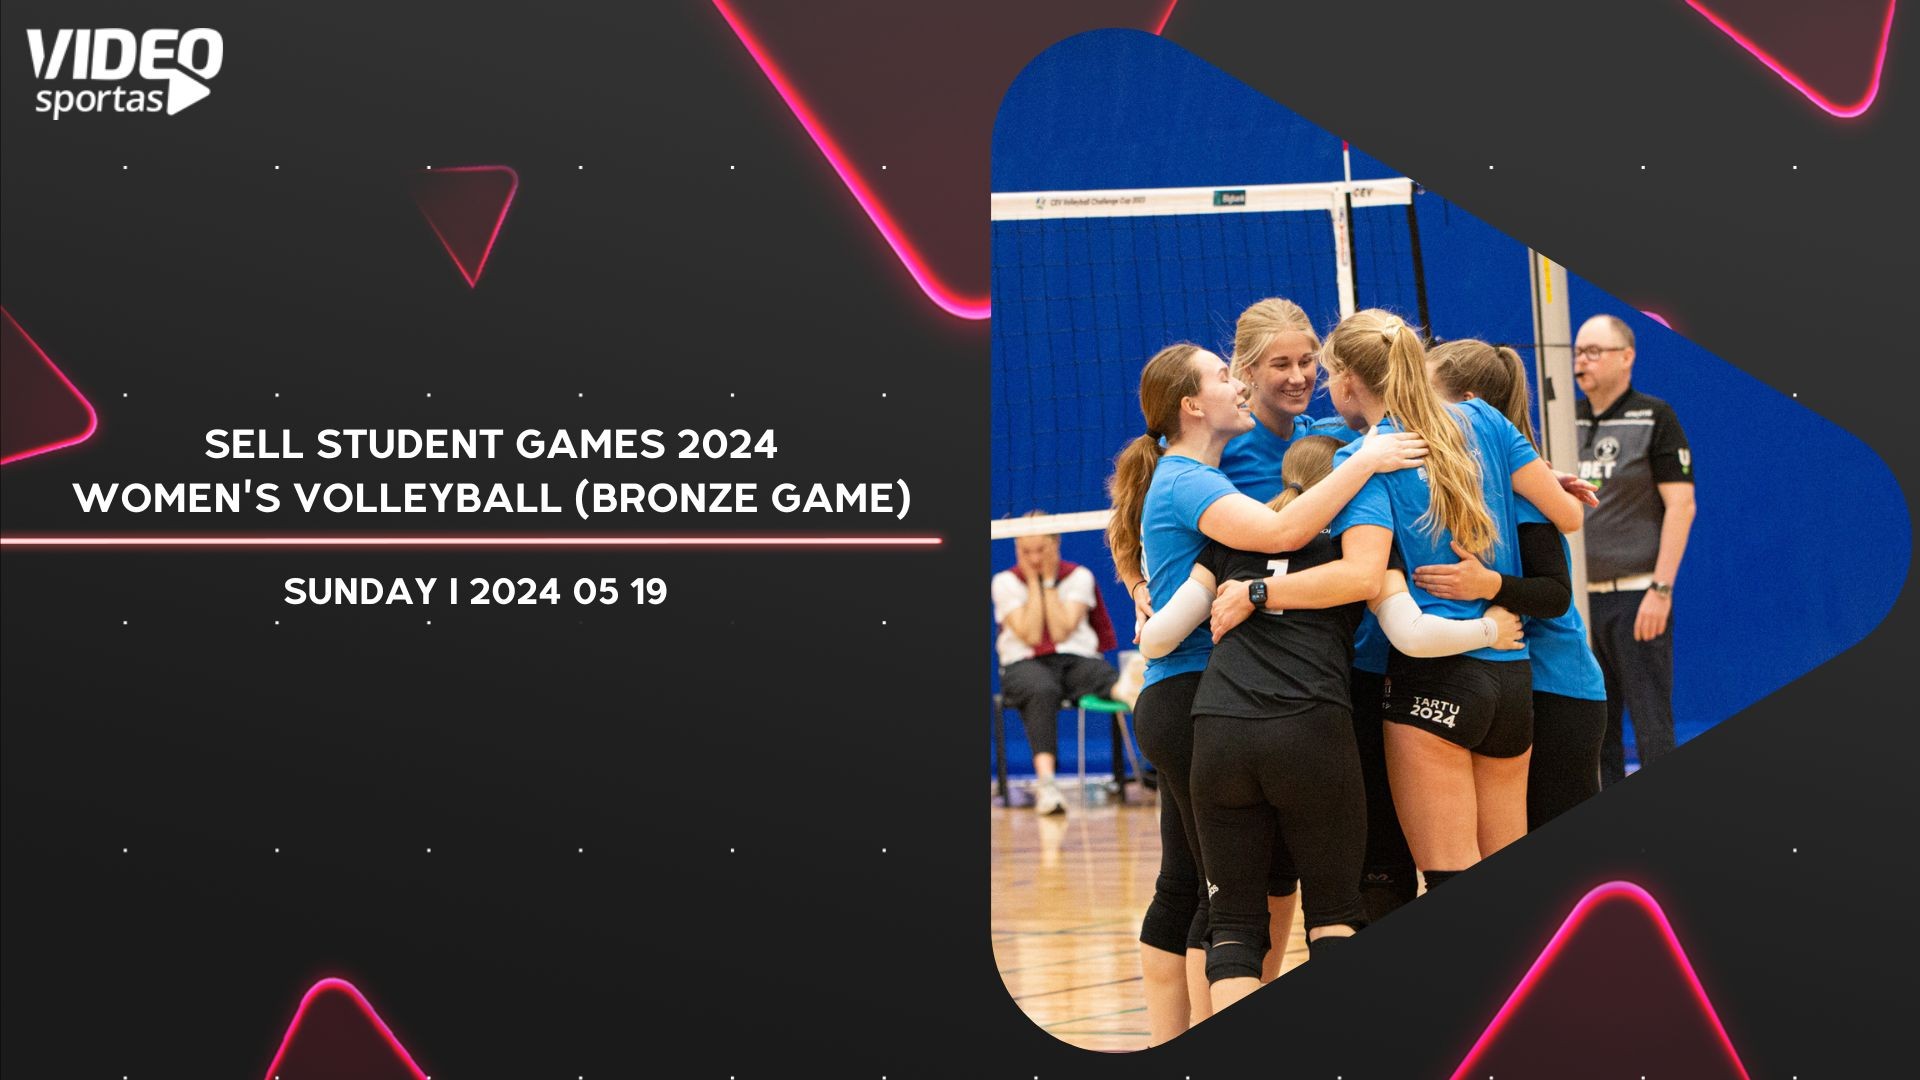 BRONZE GAME - SELL STUDENT GAMES 2024 (WOMEN'S VOLLEYBALL)